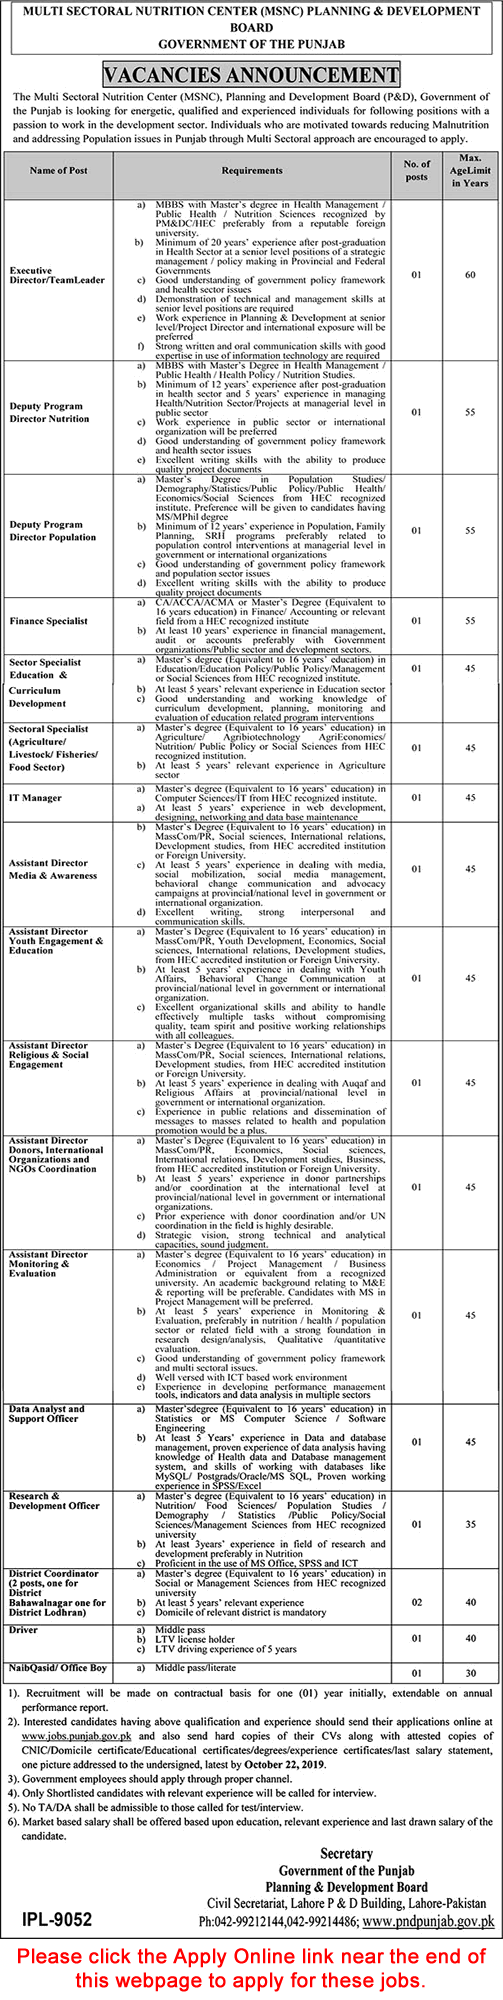 Planning and Development Department Punjab Jobs 2019 October Apply Online Multi Sectoral Nutrition Center Latest